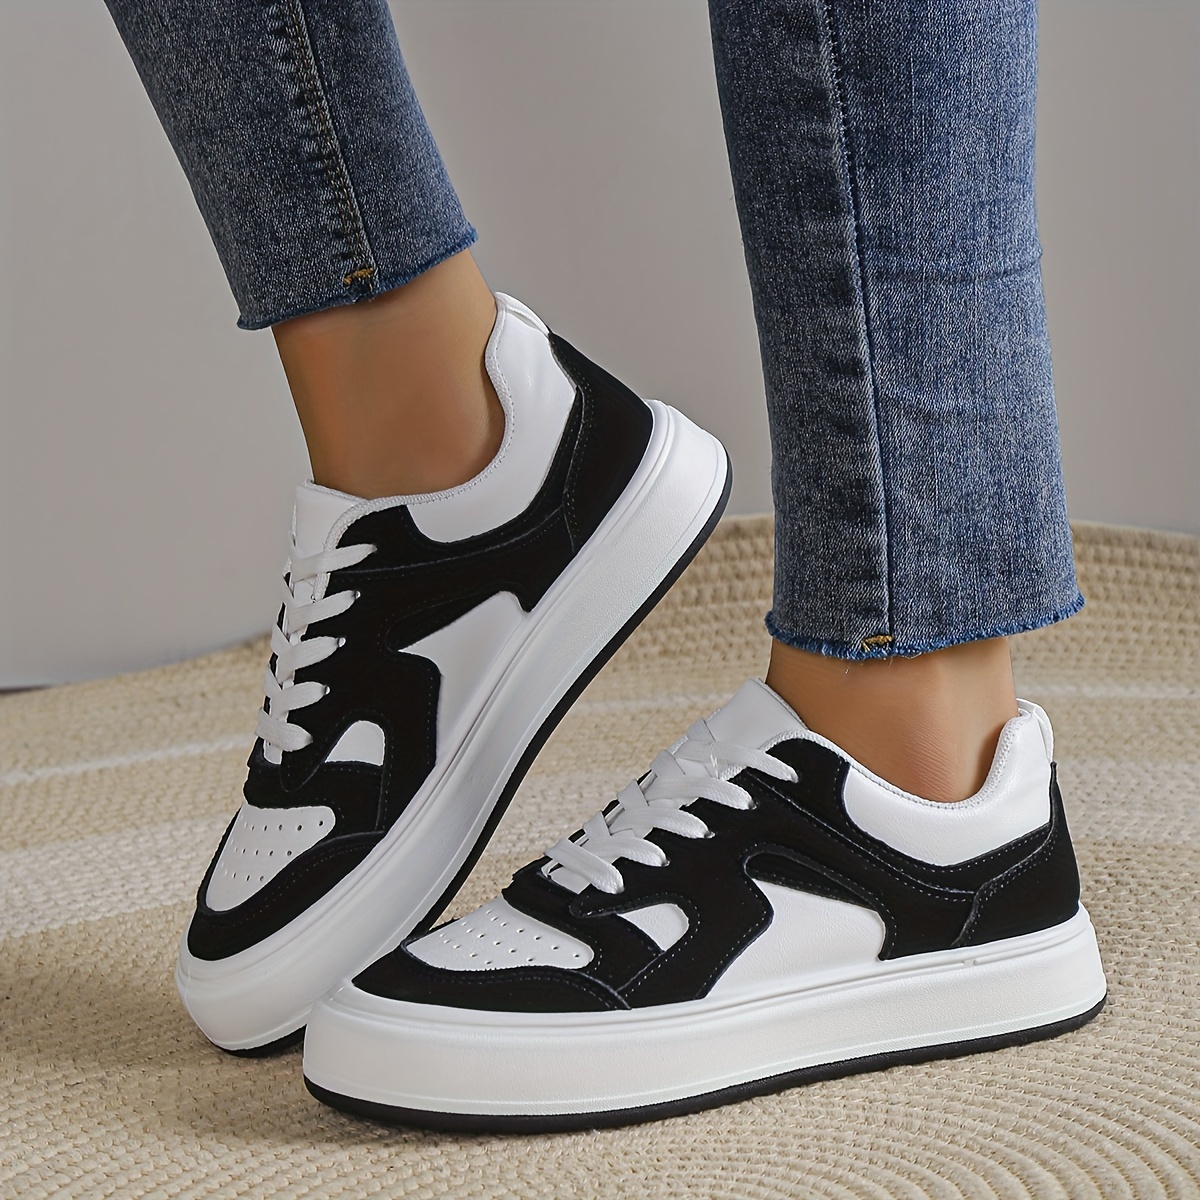 womens colorblock skate shoes versatile low top lace up sports shoes casual flat sneakers details 9